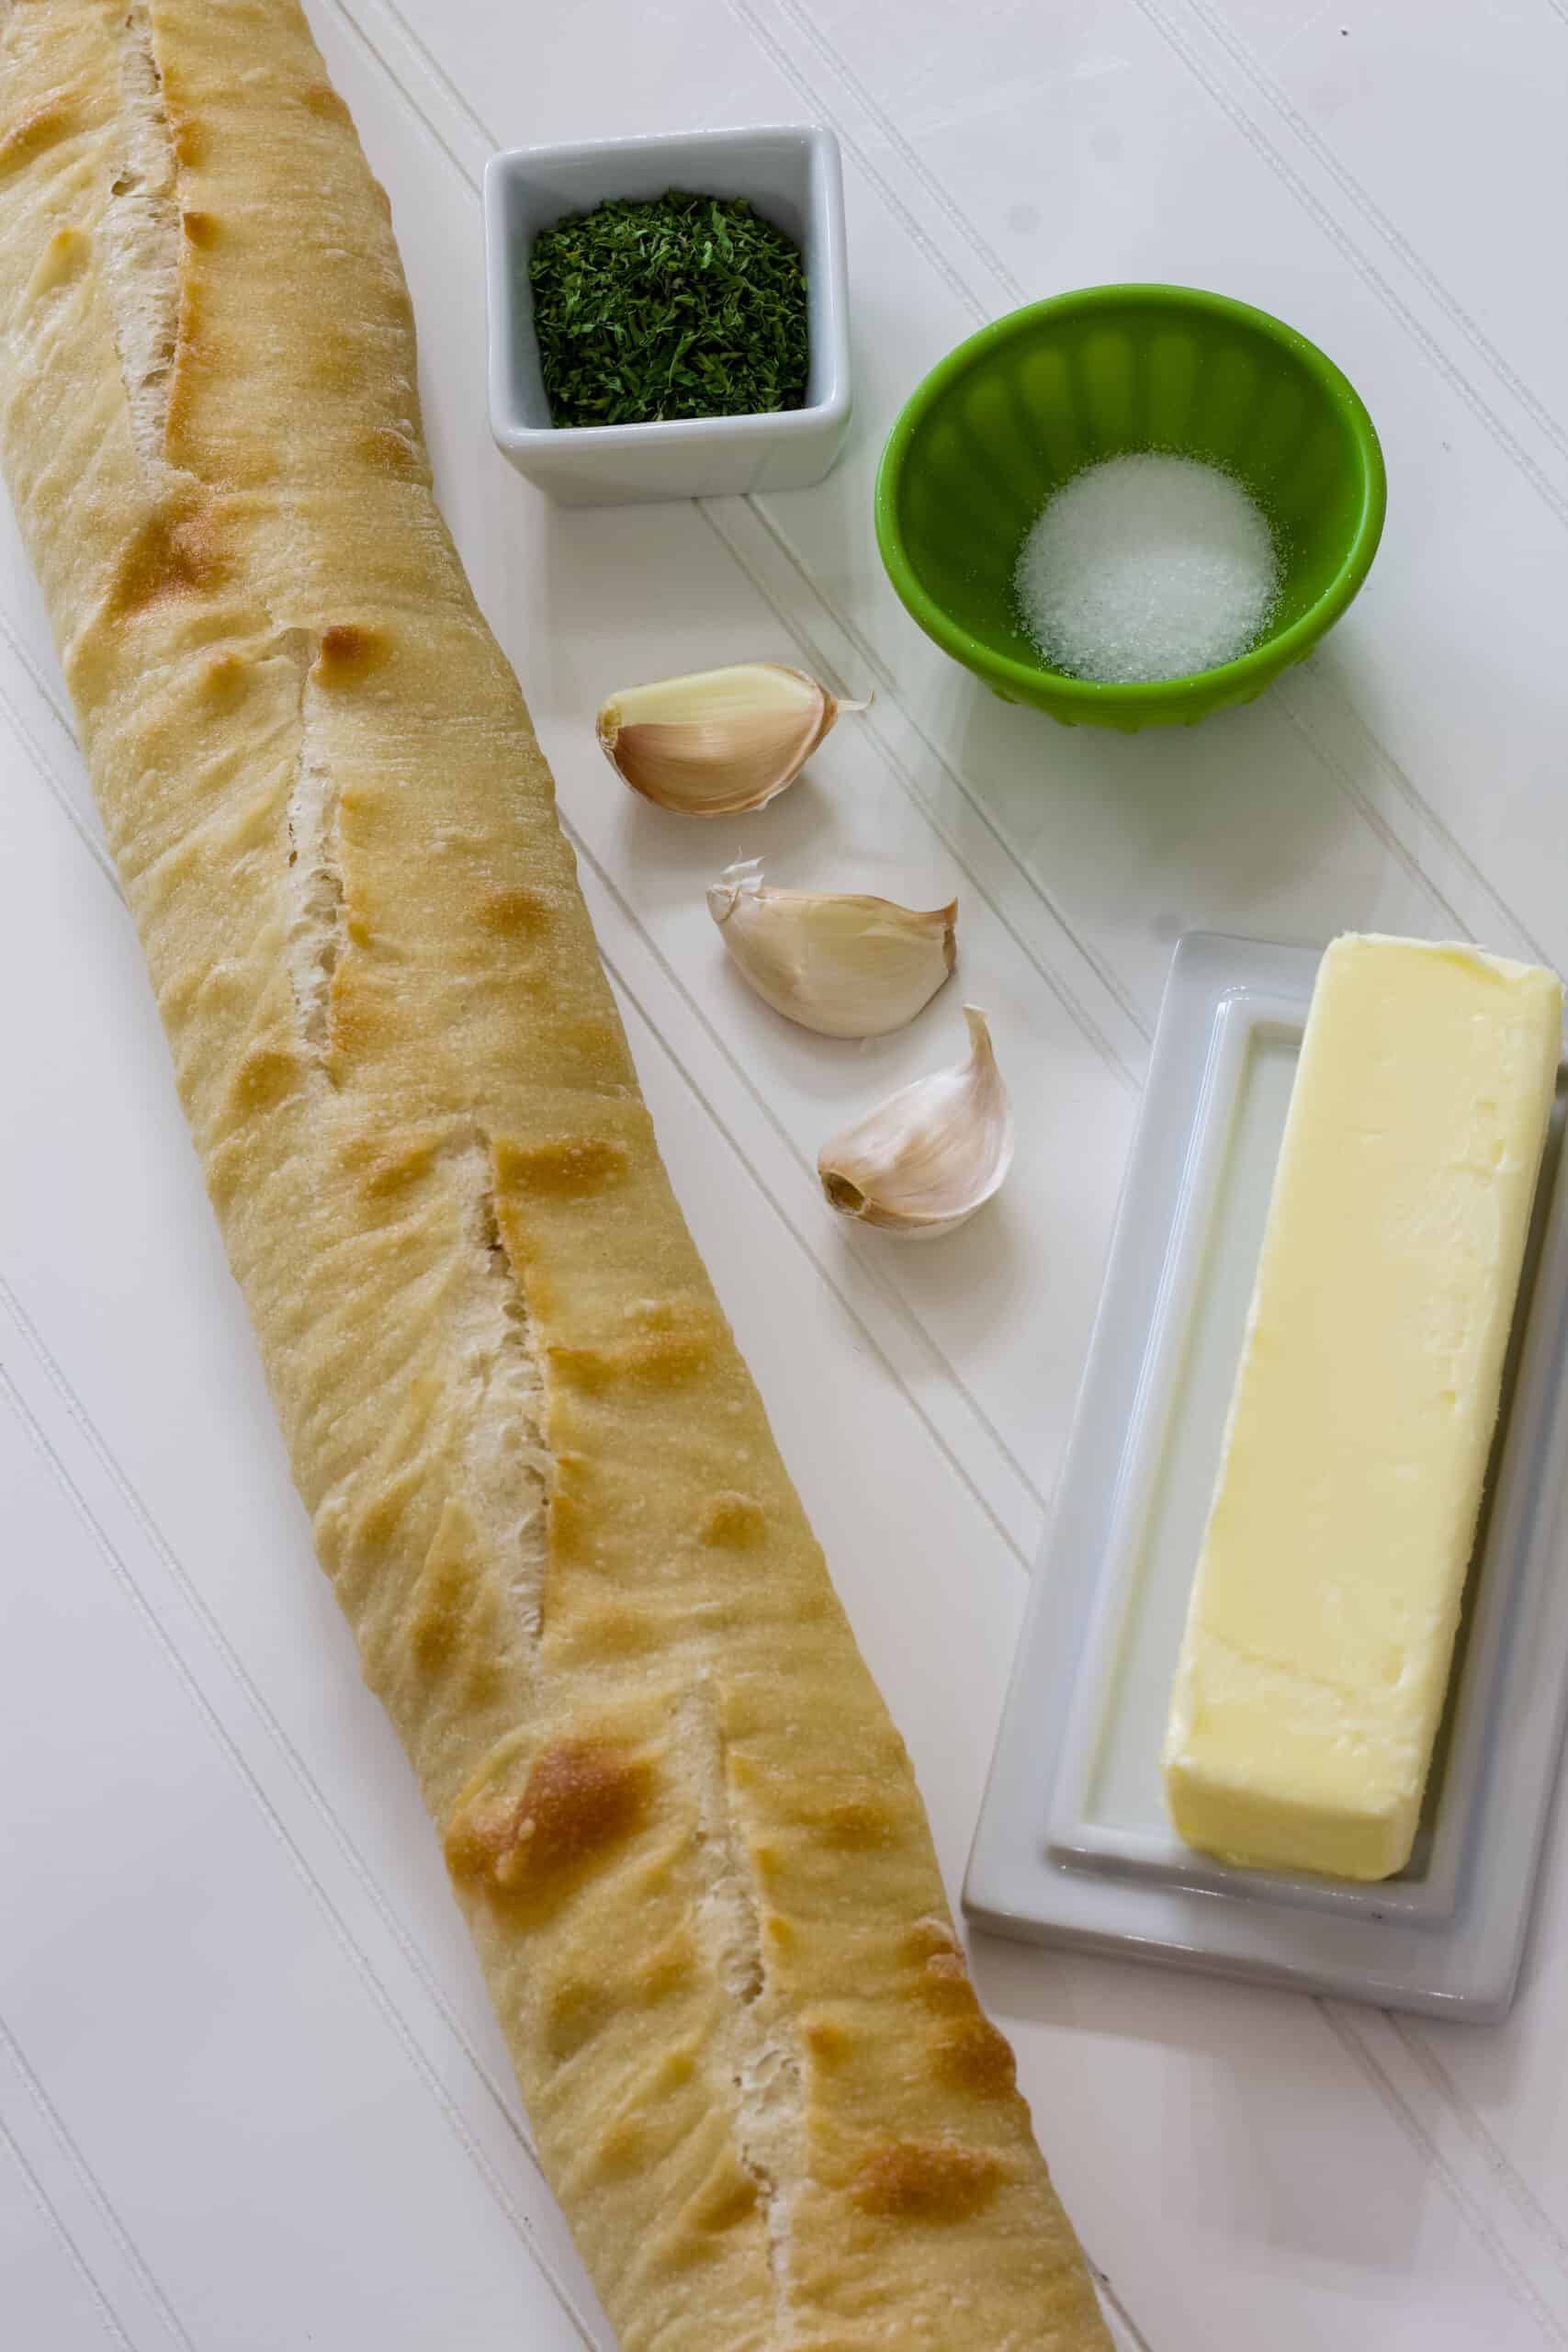 The baguette, butter, garlic, parsley and salt in individual portions on a white background.